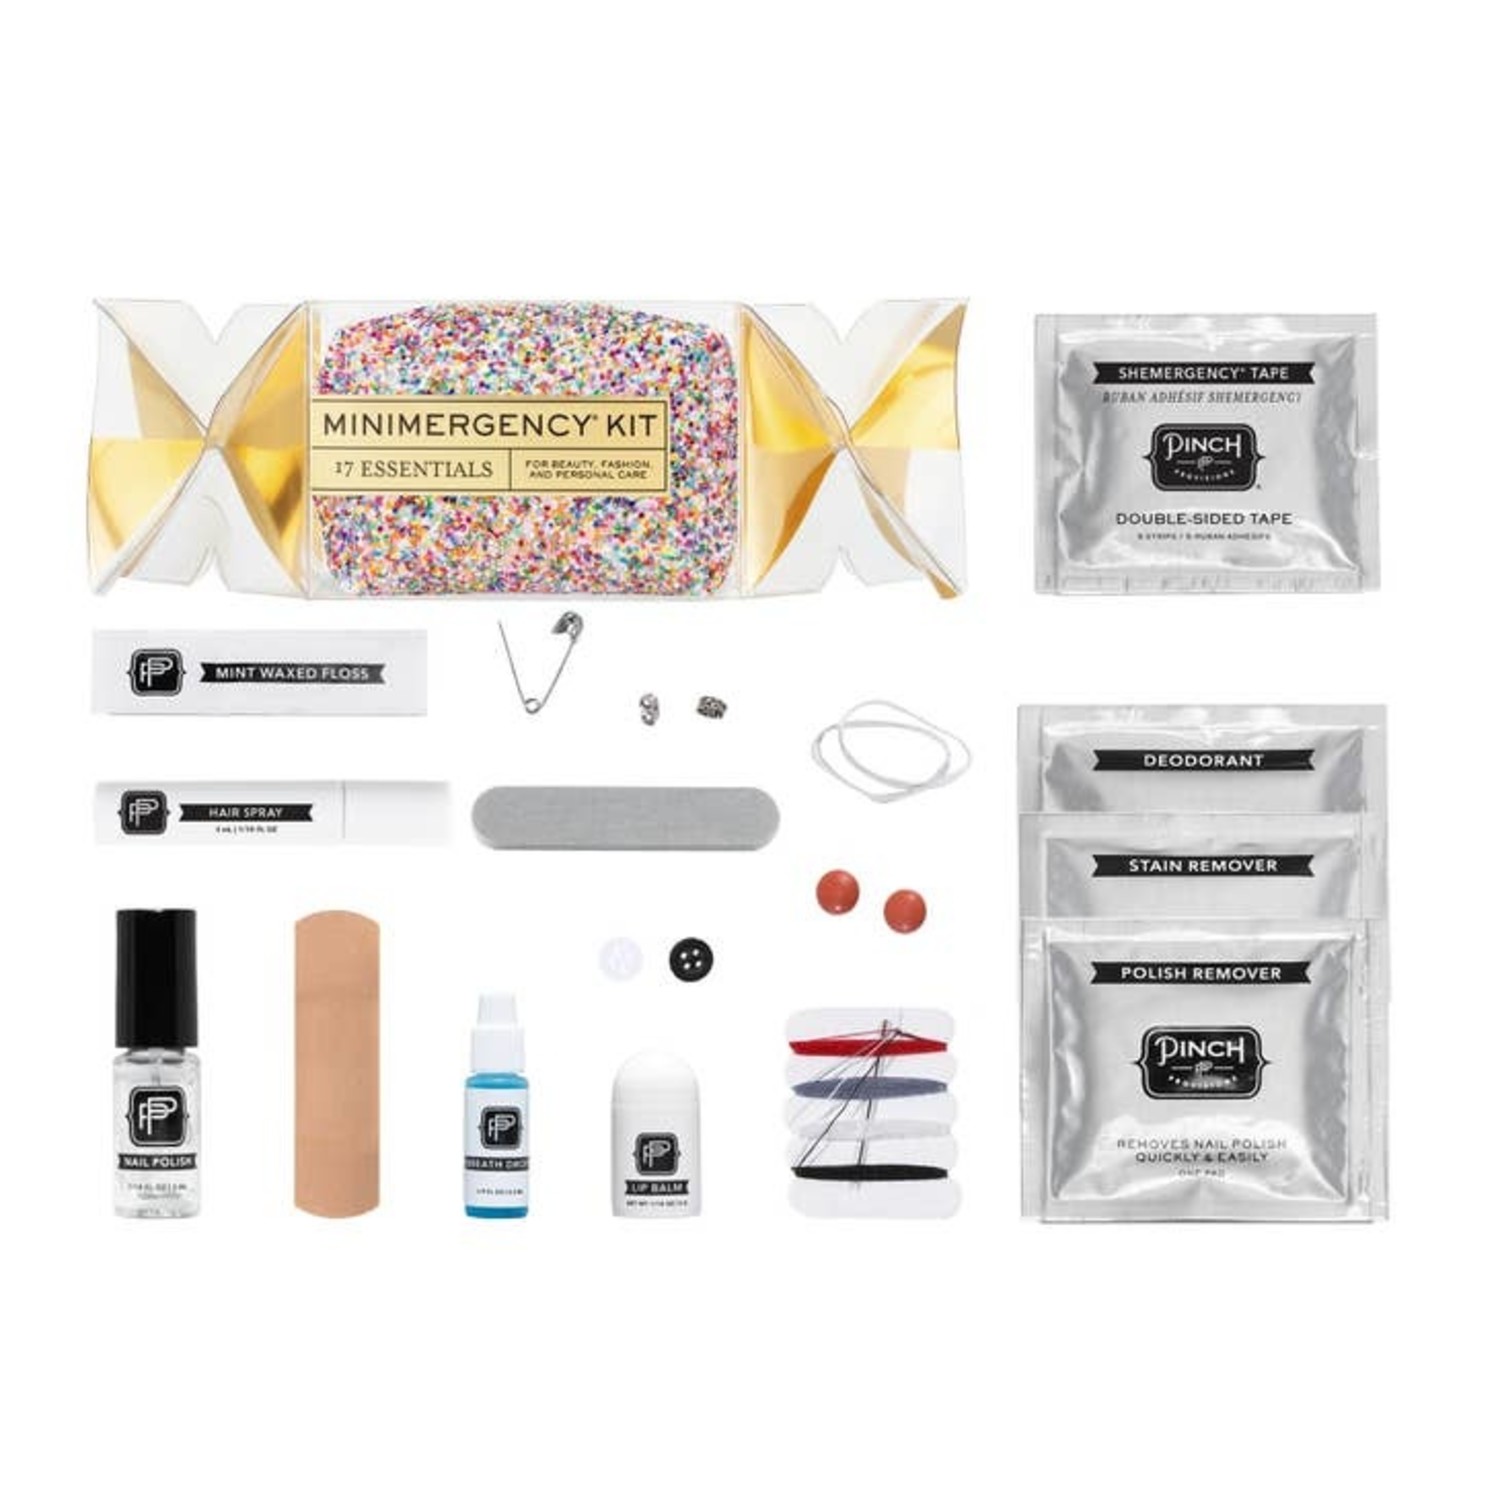 Confection Minimergency Kit – Pinch Provisions